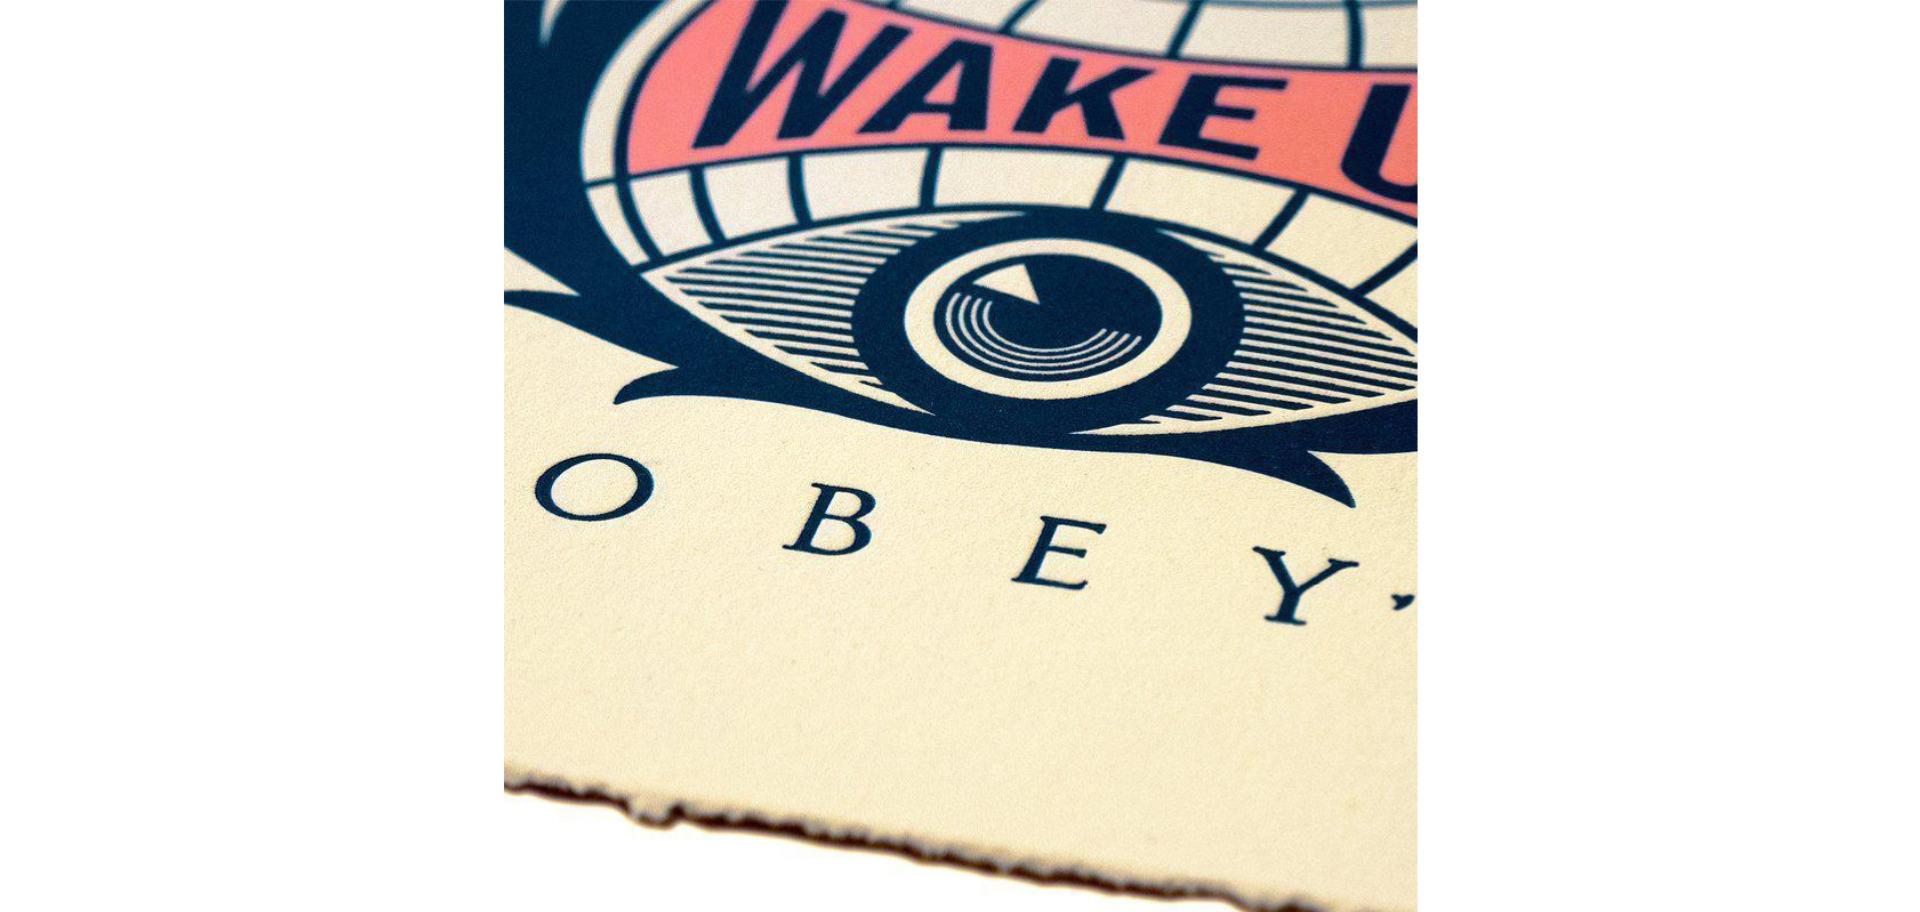 Wake Up Earth, Letterpress Print on Cream Cotton Paper, 2020 by Shepard Fairey For Sale 2